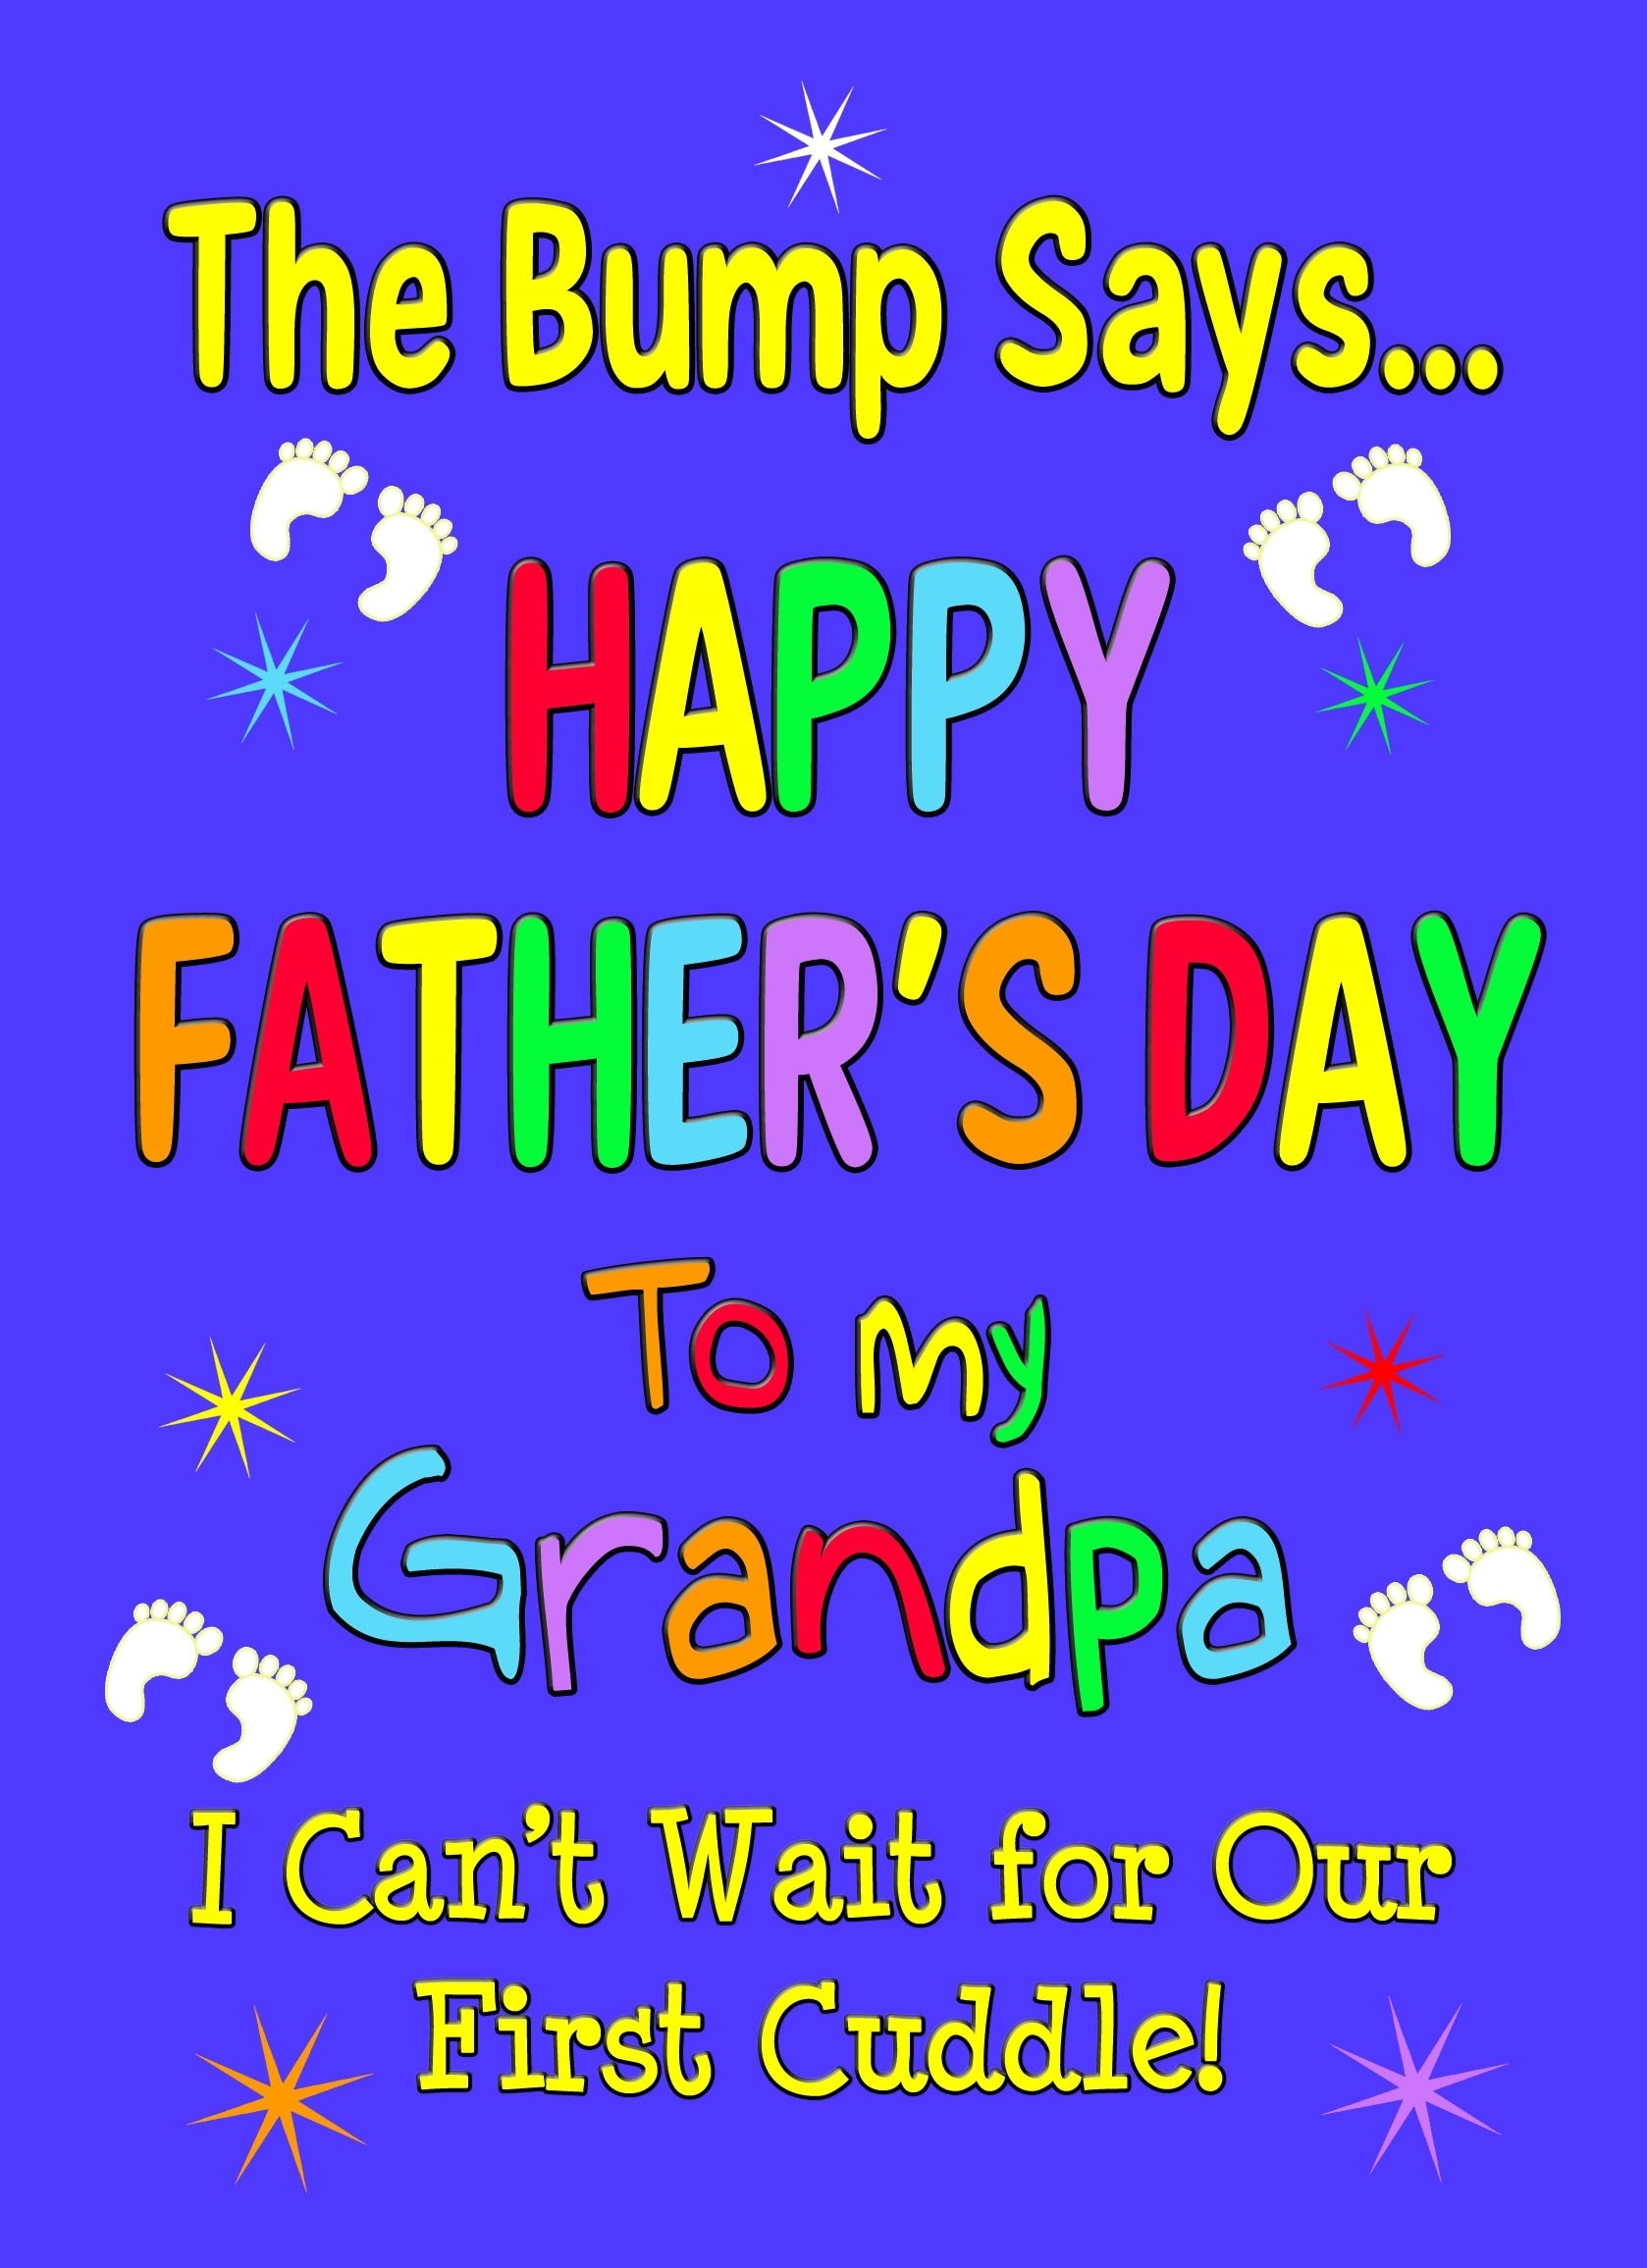 From The Bump Pregnancy Fathers Day Card (Grandpa, Blue)